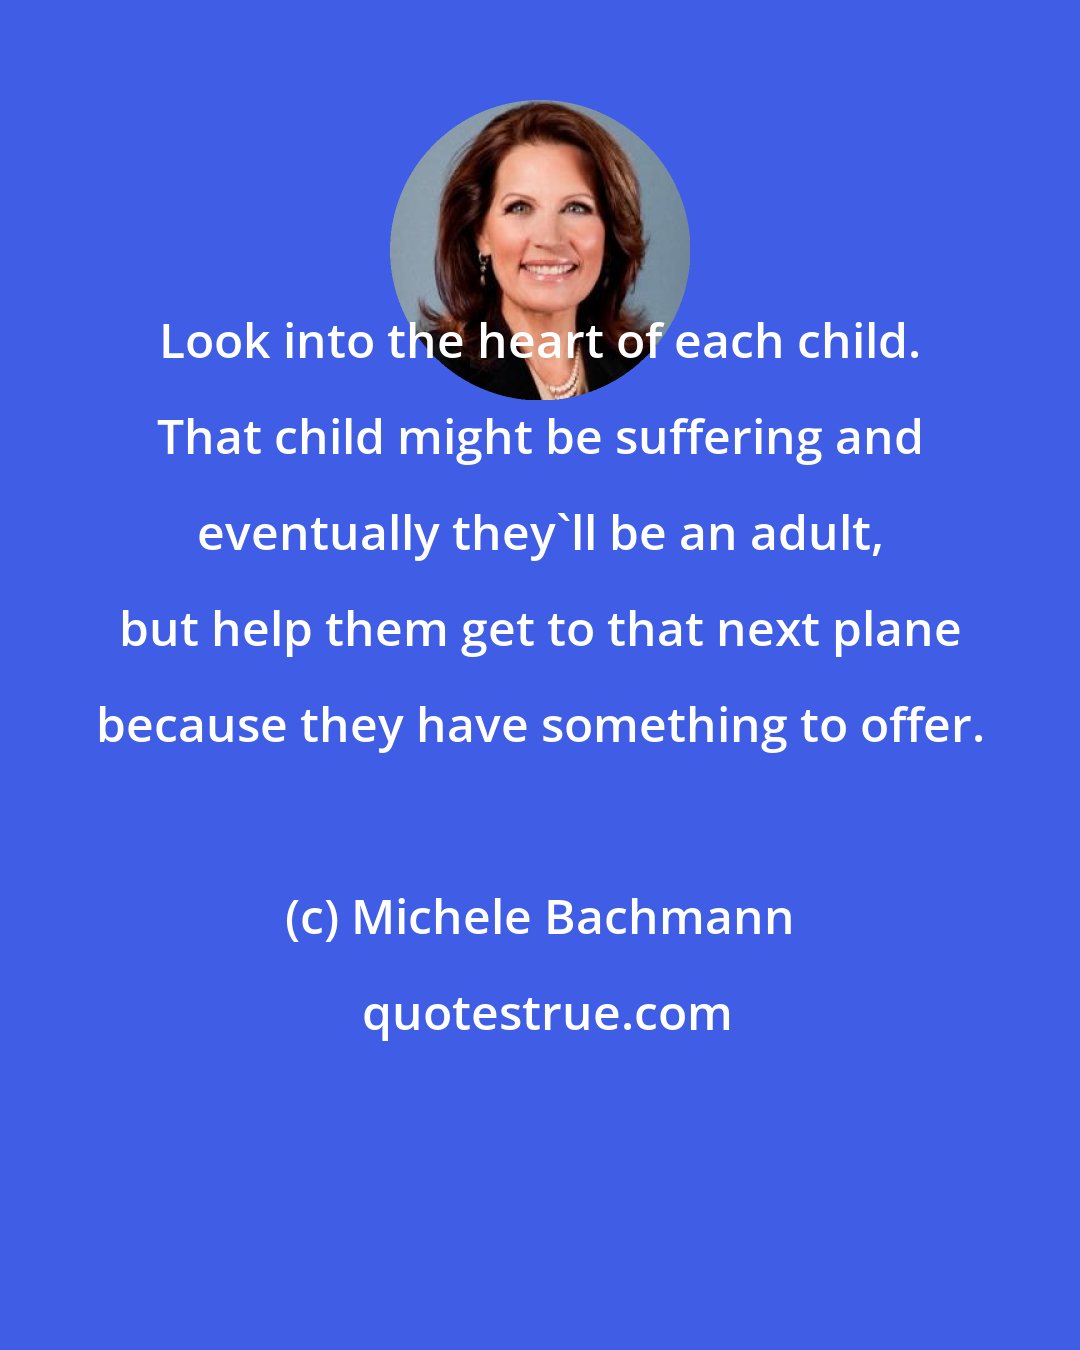 Michele Bachmann: Look into the heart of each child. That child might be suffering and eventually they'll be an adult, but help them get to that next plane because they have something to offer.